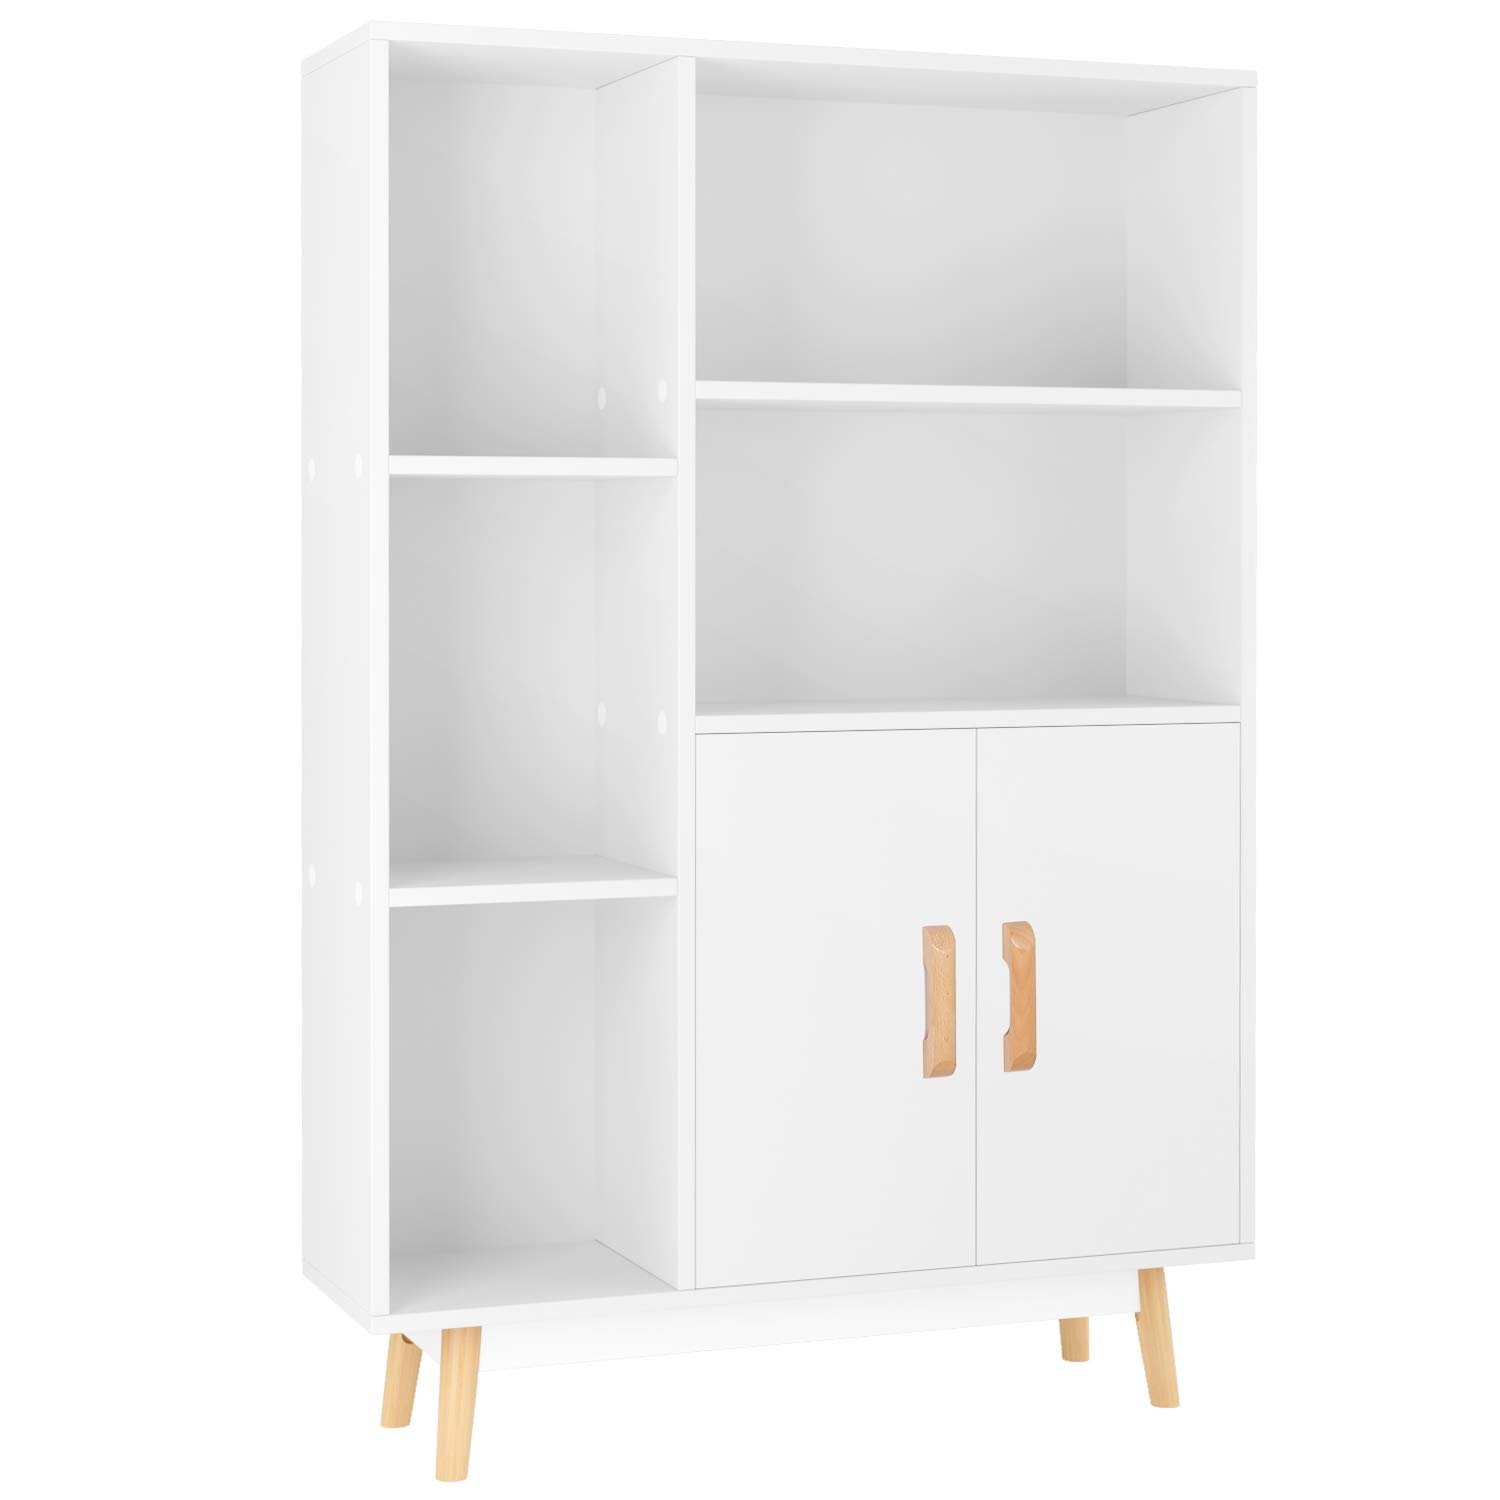 Homfa 5 Cube Bookcase with Door, Open Shelves Free Standing Storage Cabinet with Solid Legs, White Finish - image 3 of 12